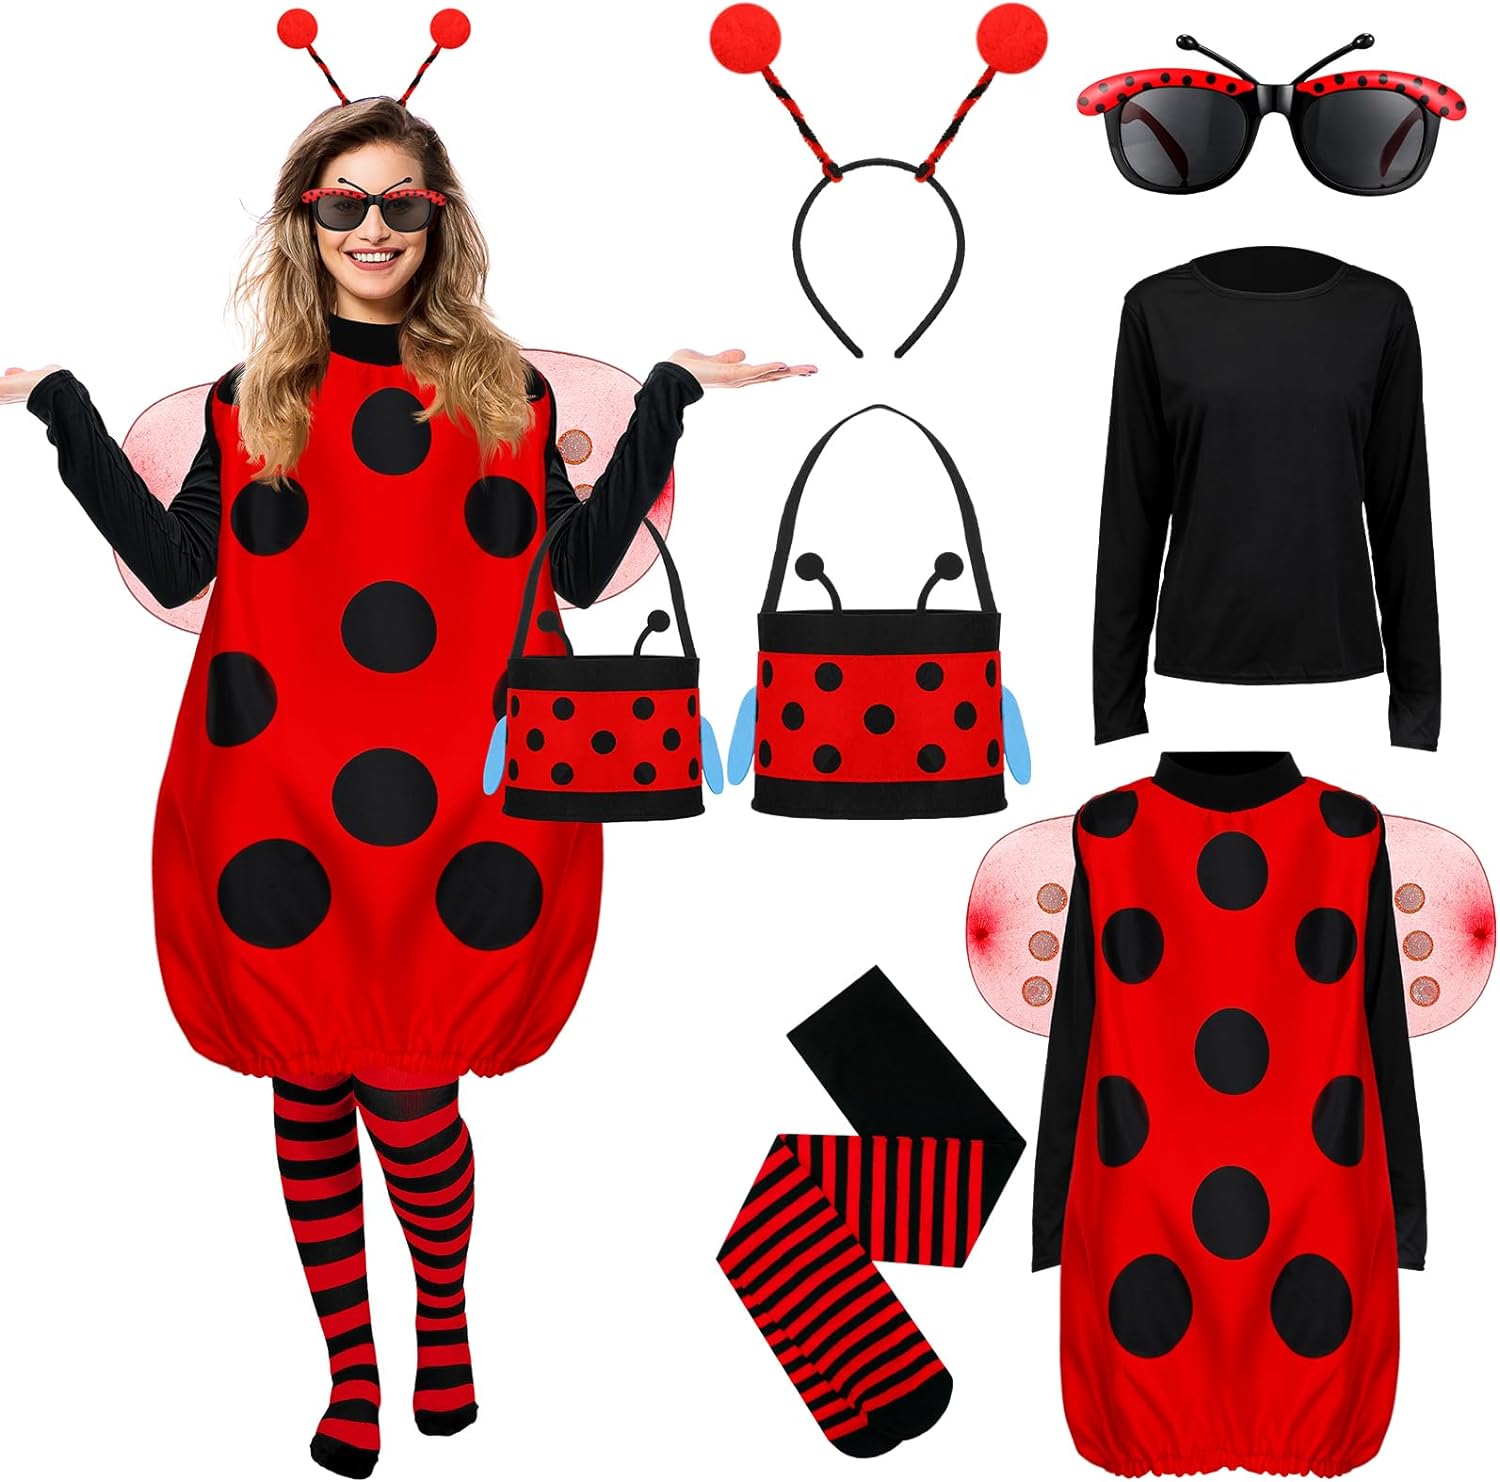 Read more about the article Janmercy Ladybug Wings Costume Kit Review